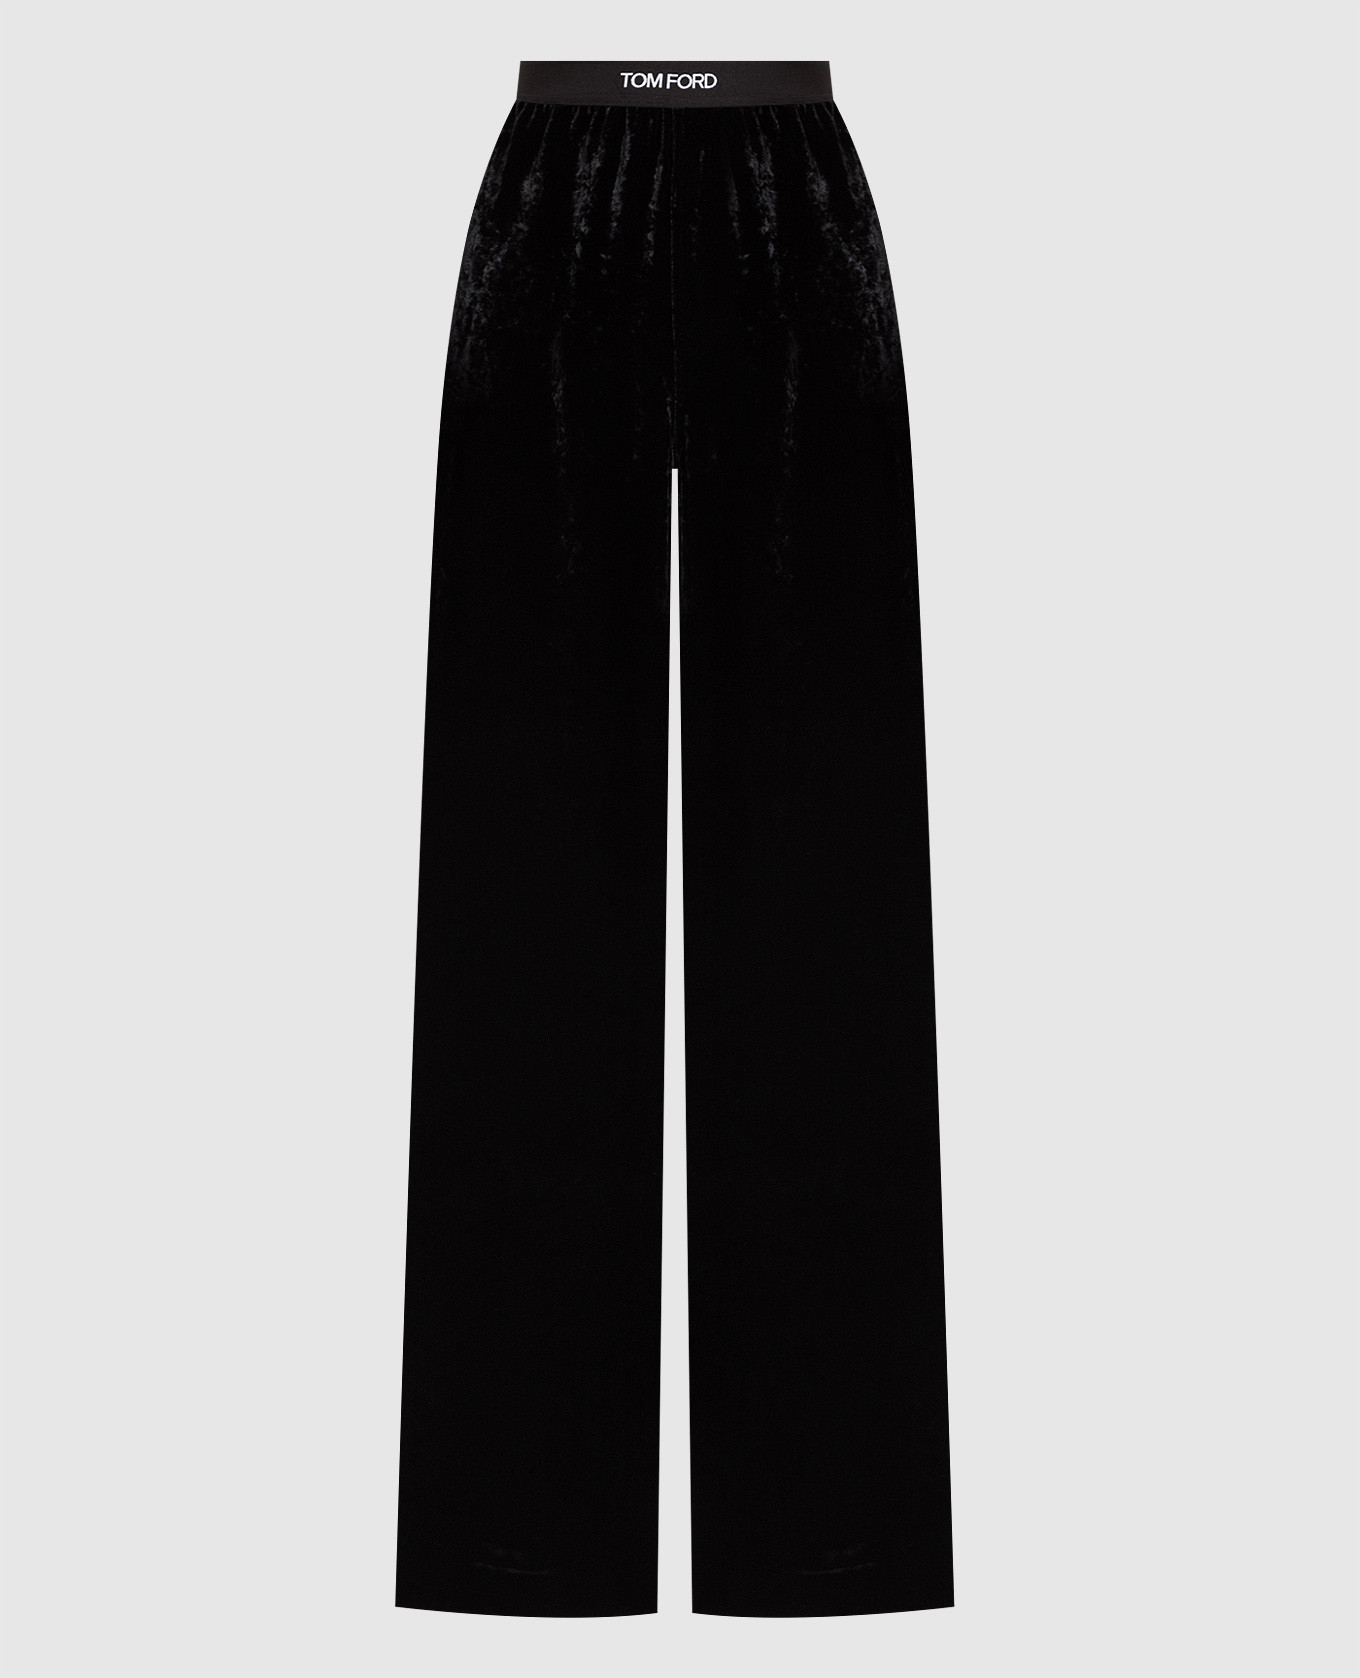 Black velor trousers with a logo pattern